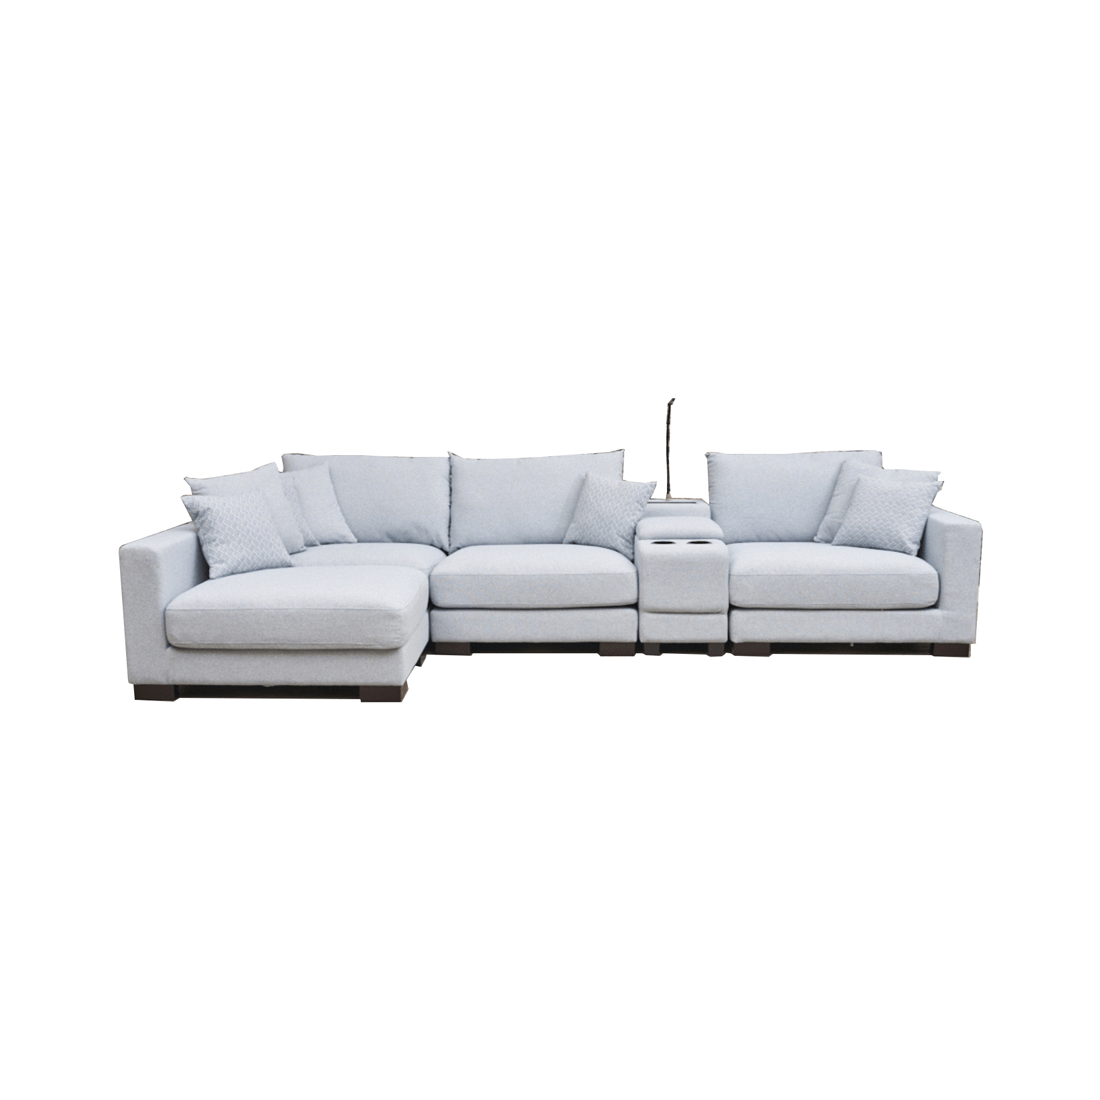 Paige 2.5 Seater Fabric Modular Chaise Lounge